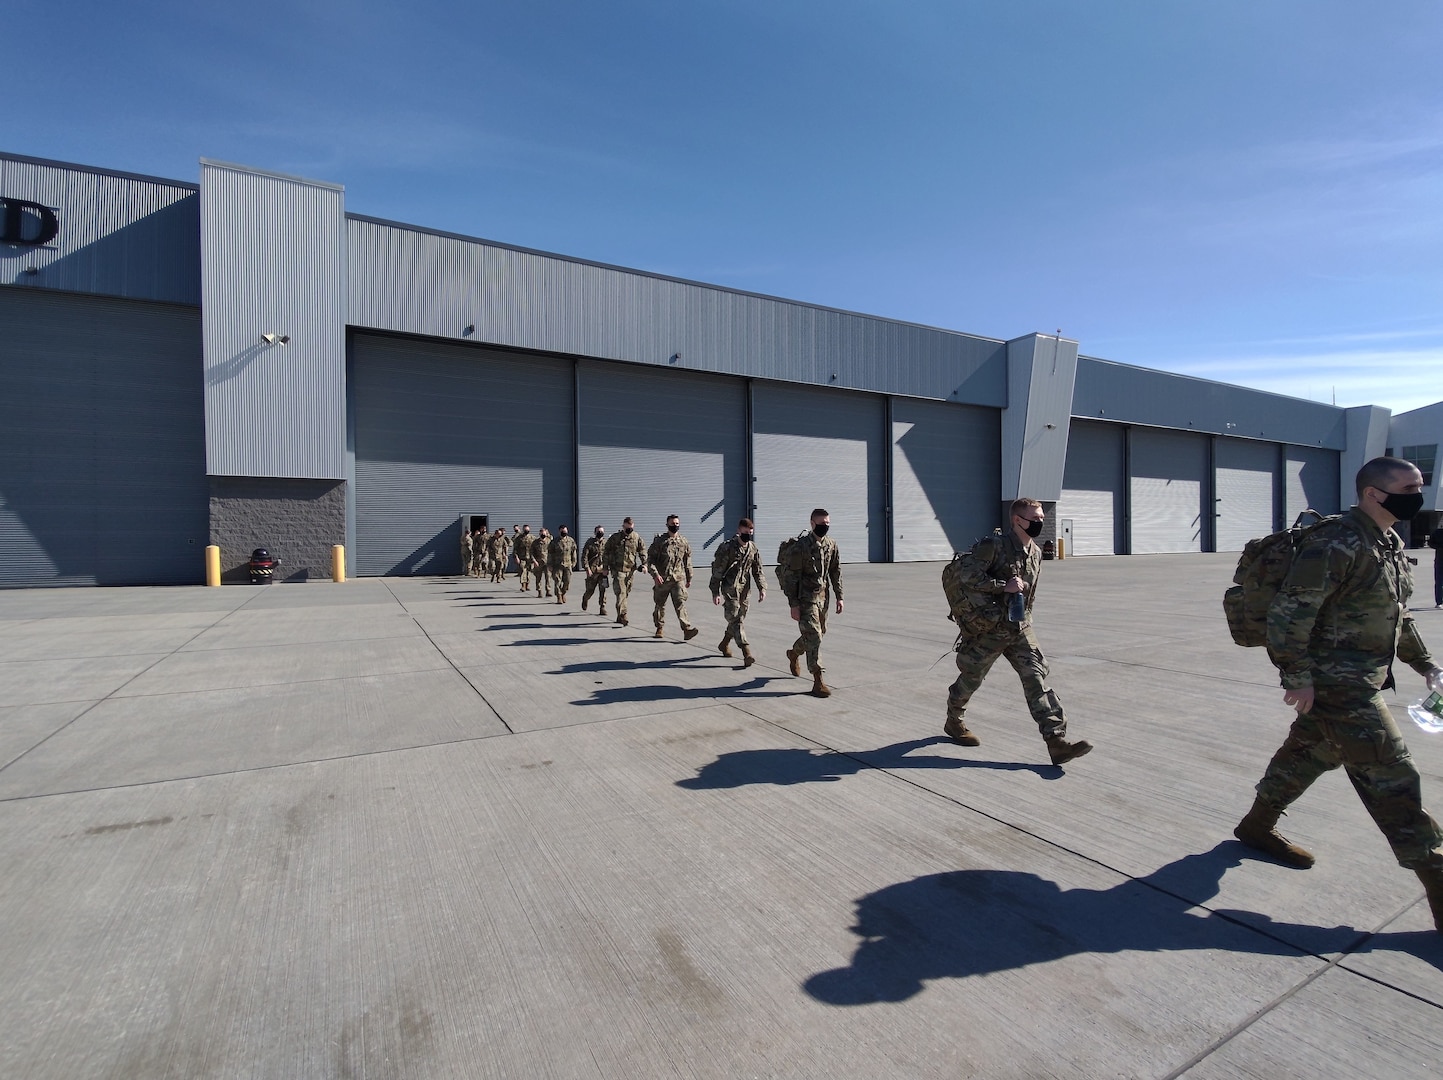 Members of Charlie Troop, 1st Squadron, 172nd Cavalry (Mountain) and Bravo Company, 572nd Brigade Engineer Battalion (Mountain), Vermont Army National Guard, begin to load onto their flight at the Army Aviation Support Facility, South Burlington, Vermont, March 10, 2021. In total, over 100 soldiers comprise these deployments to U.S. Africa Command to conduct area security support operations. (U.S. National Guard photo by Joshua Cohen)